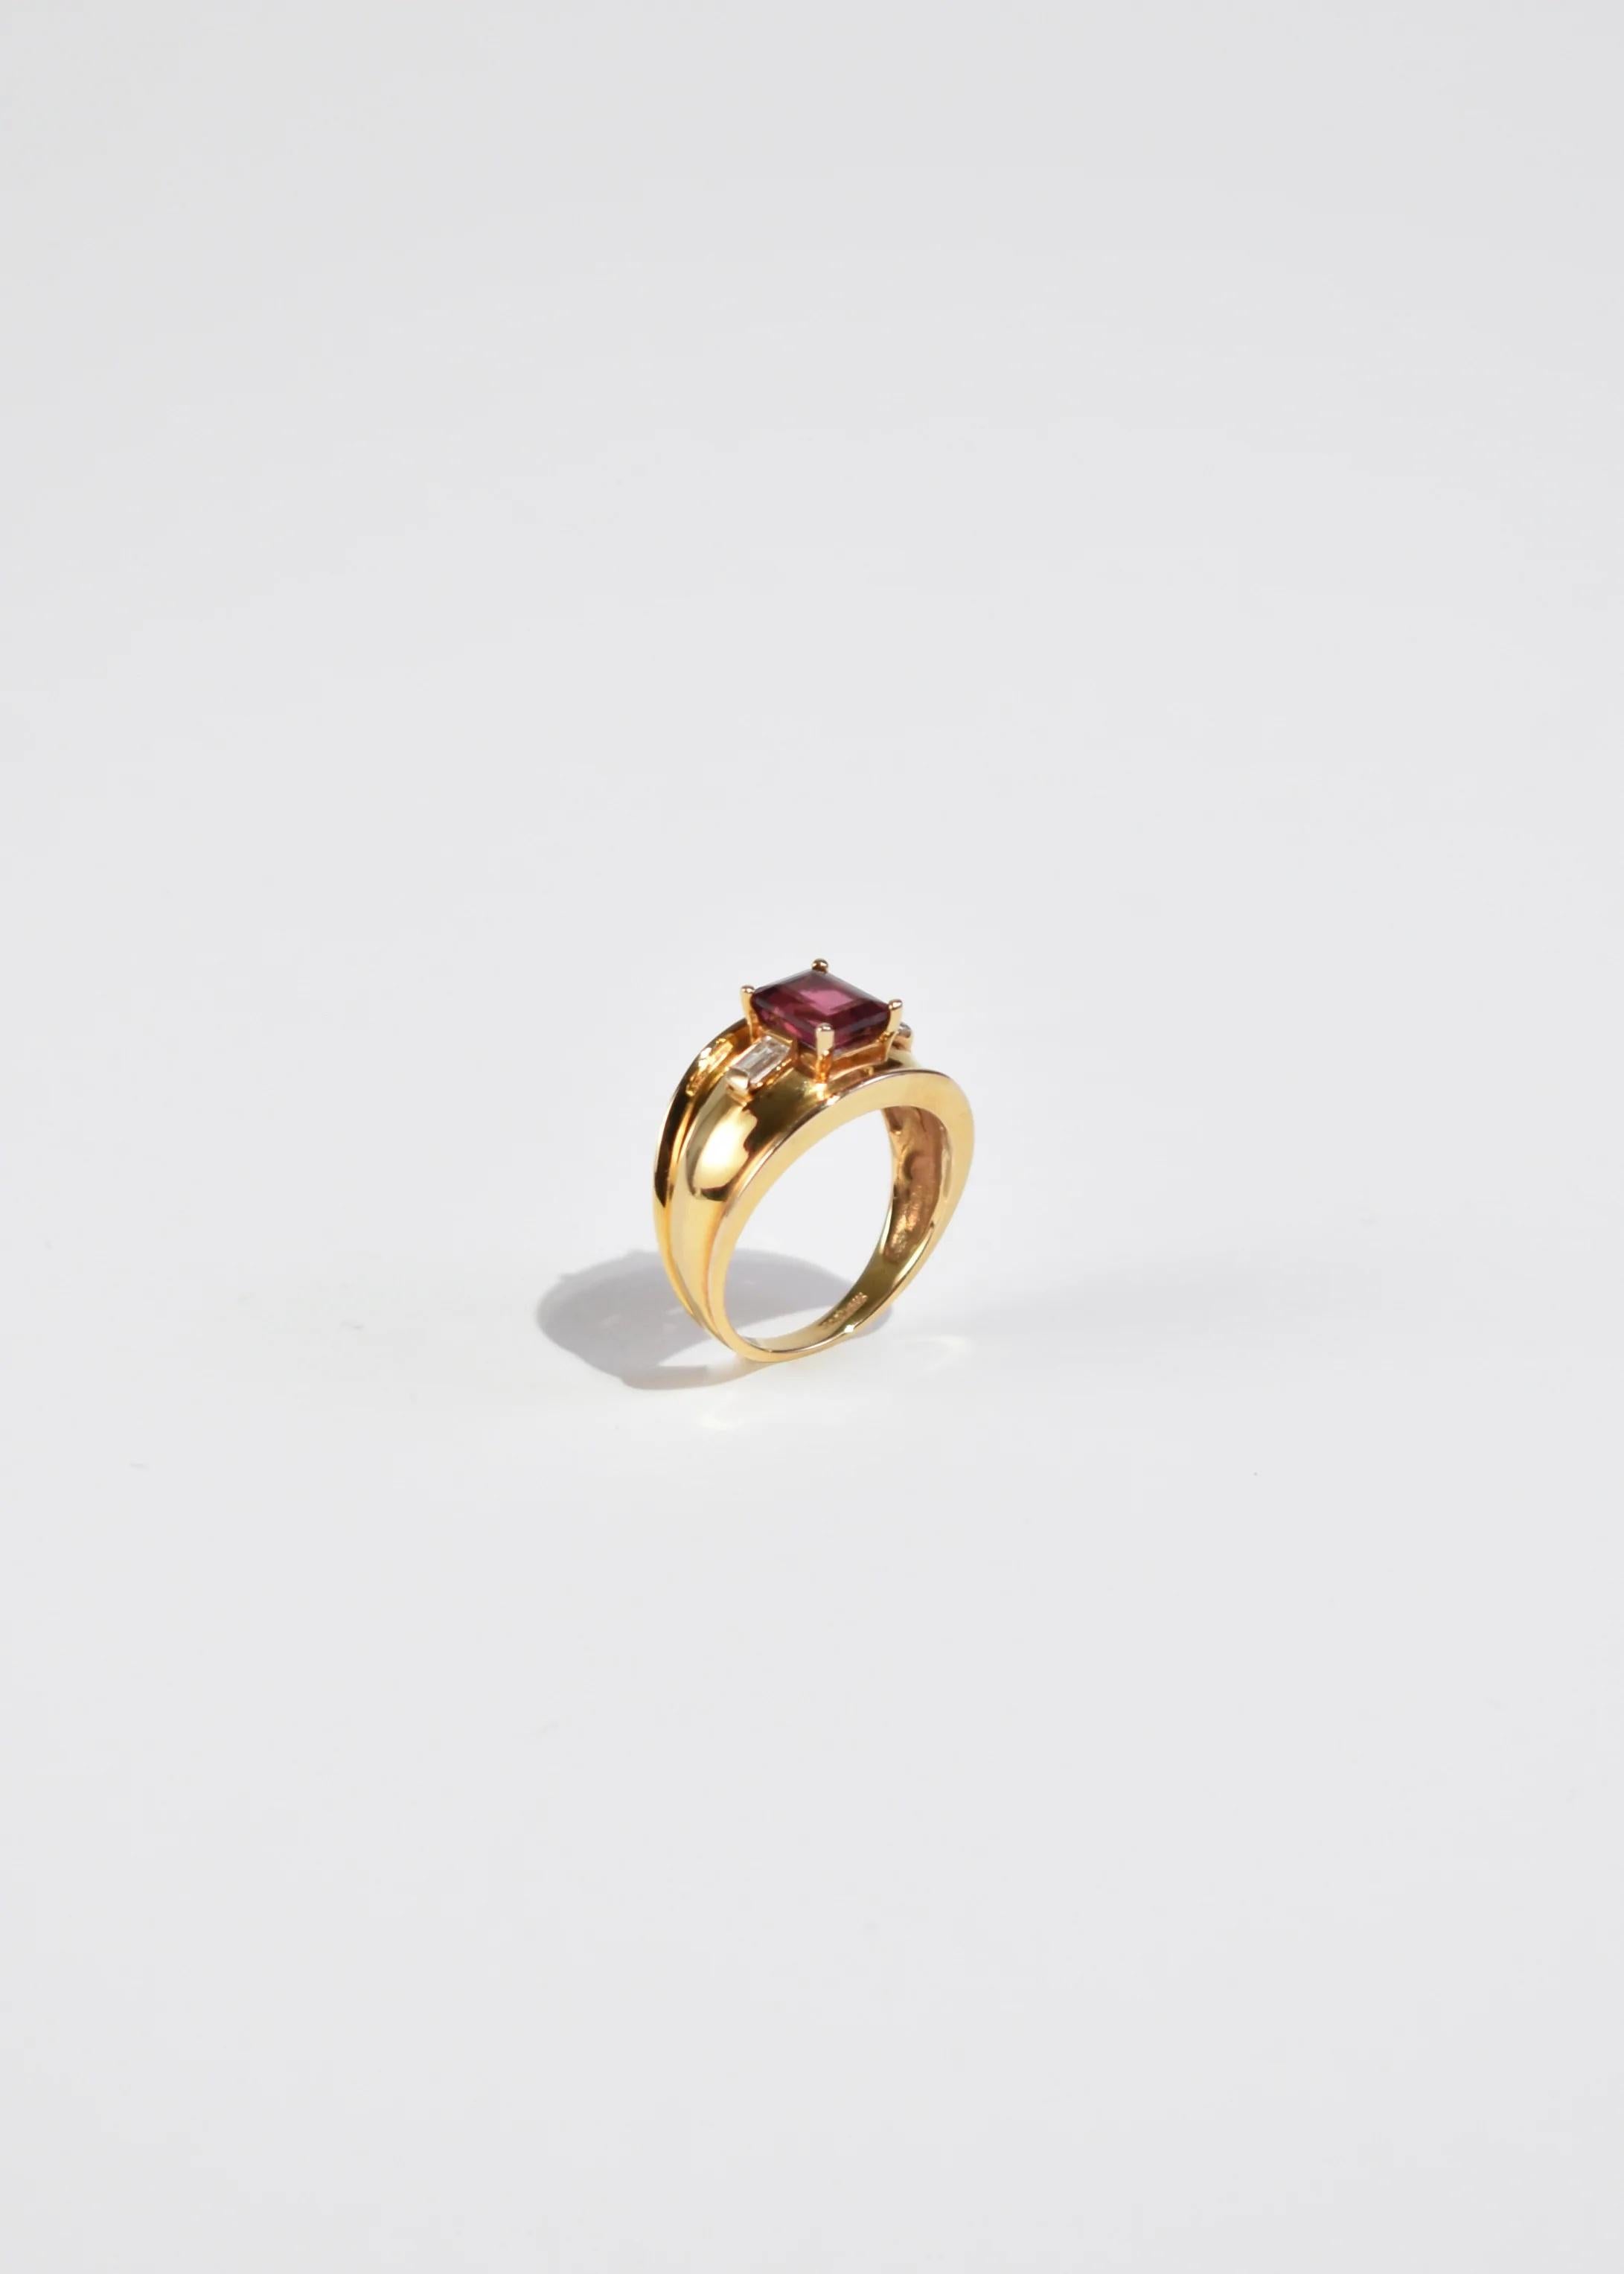 Stunning vintage gold ring with pink tourmaline and diamond stones. Stamped 14k.

Material: 14k gold, pink tourmaline, diamond.

